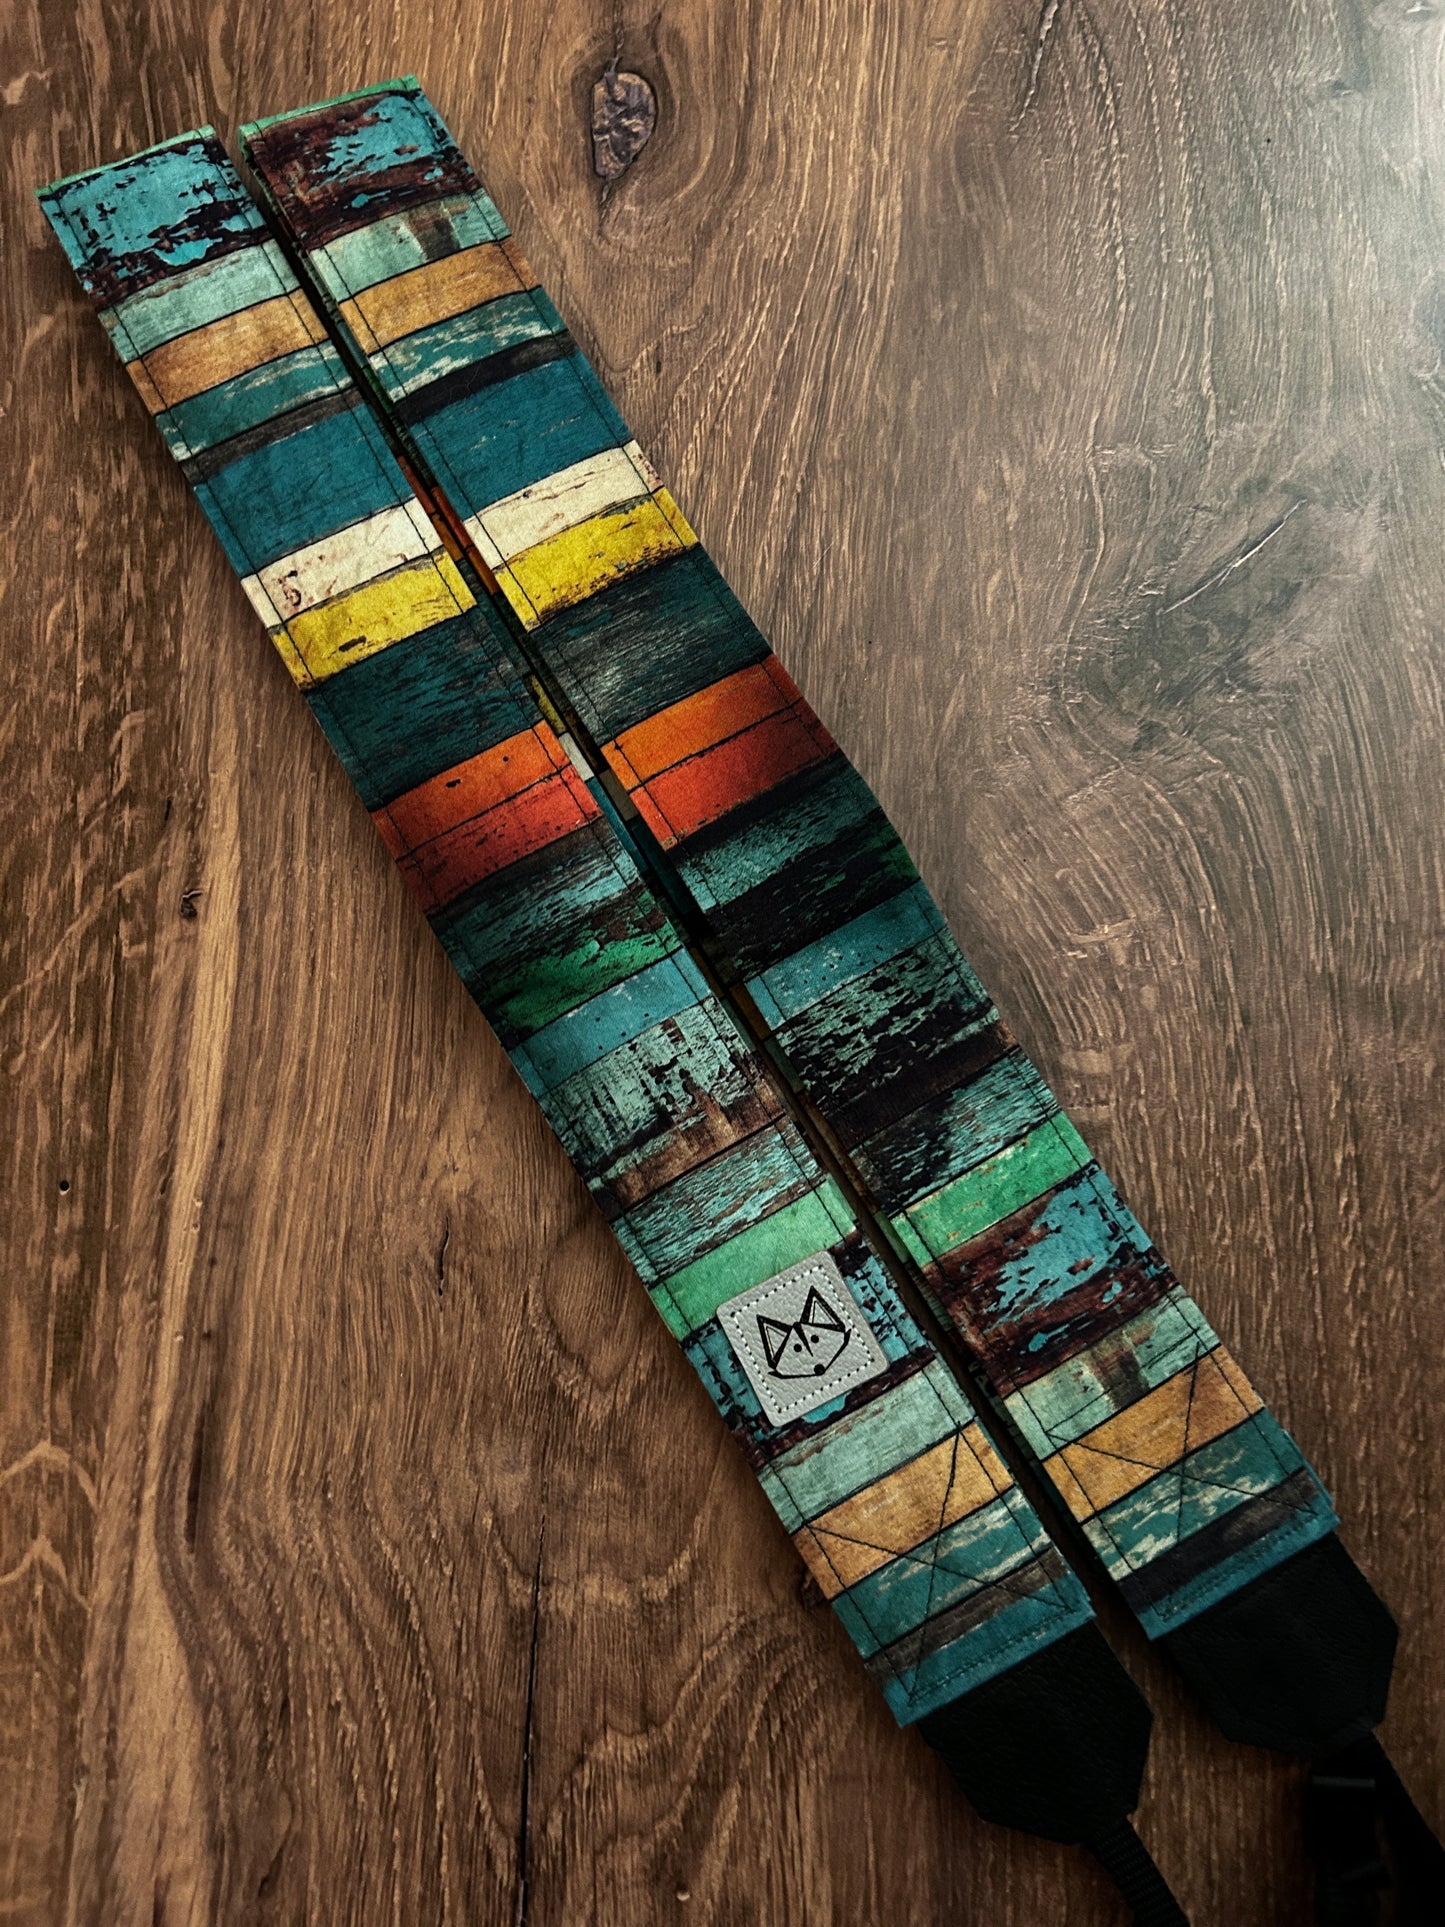 Colorful Fence Adjustable Handmade Fabric Camera Strap - DSLR Strap - Photography Accessories - Gift